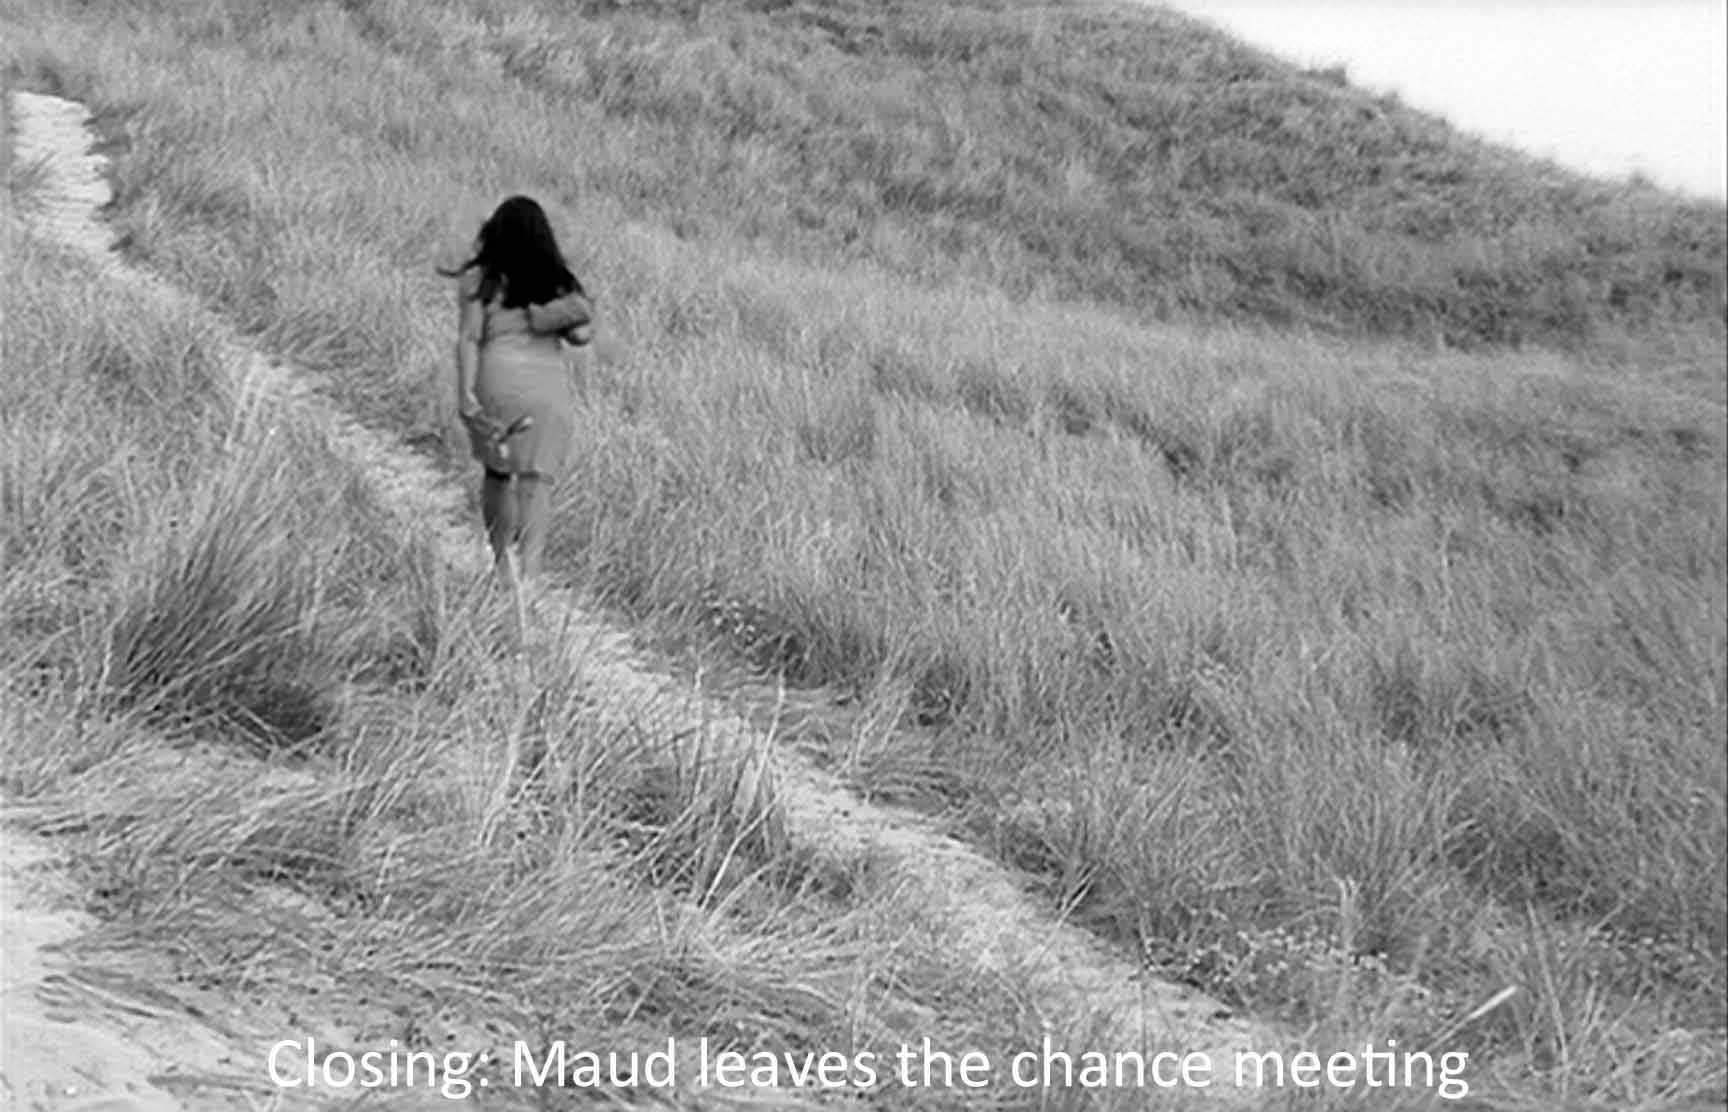 Closing: Maud leaves the chance meeting